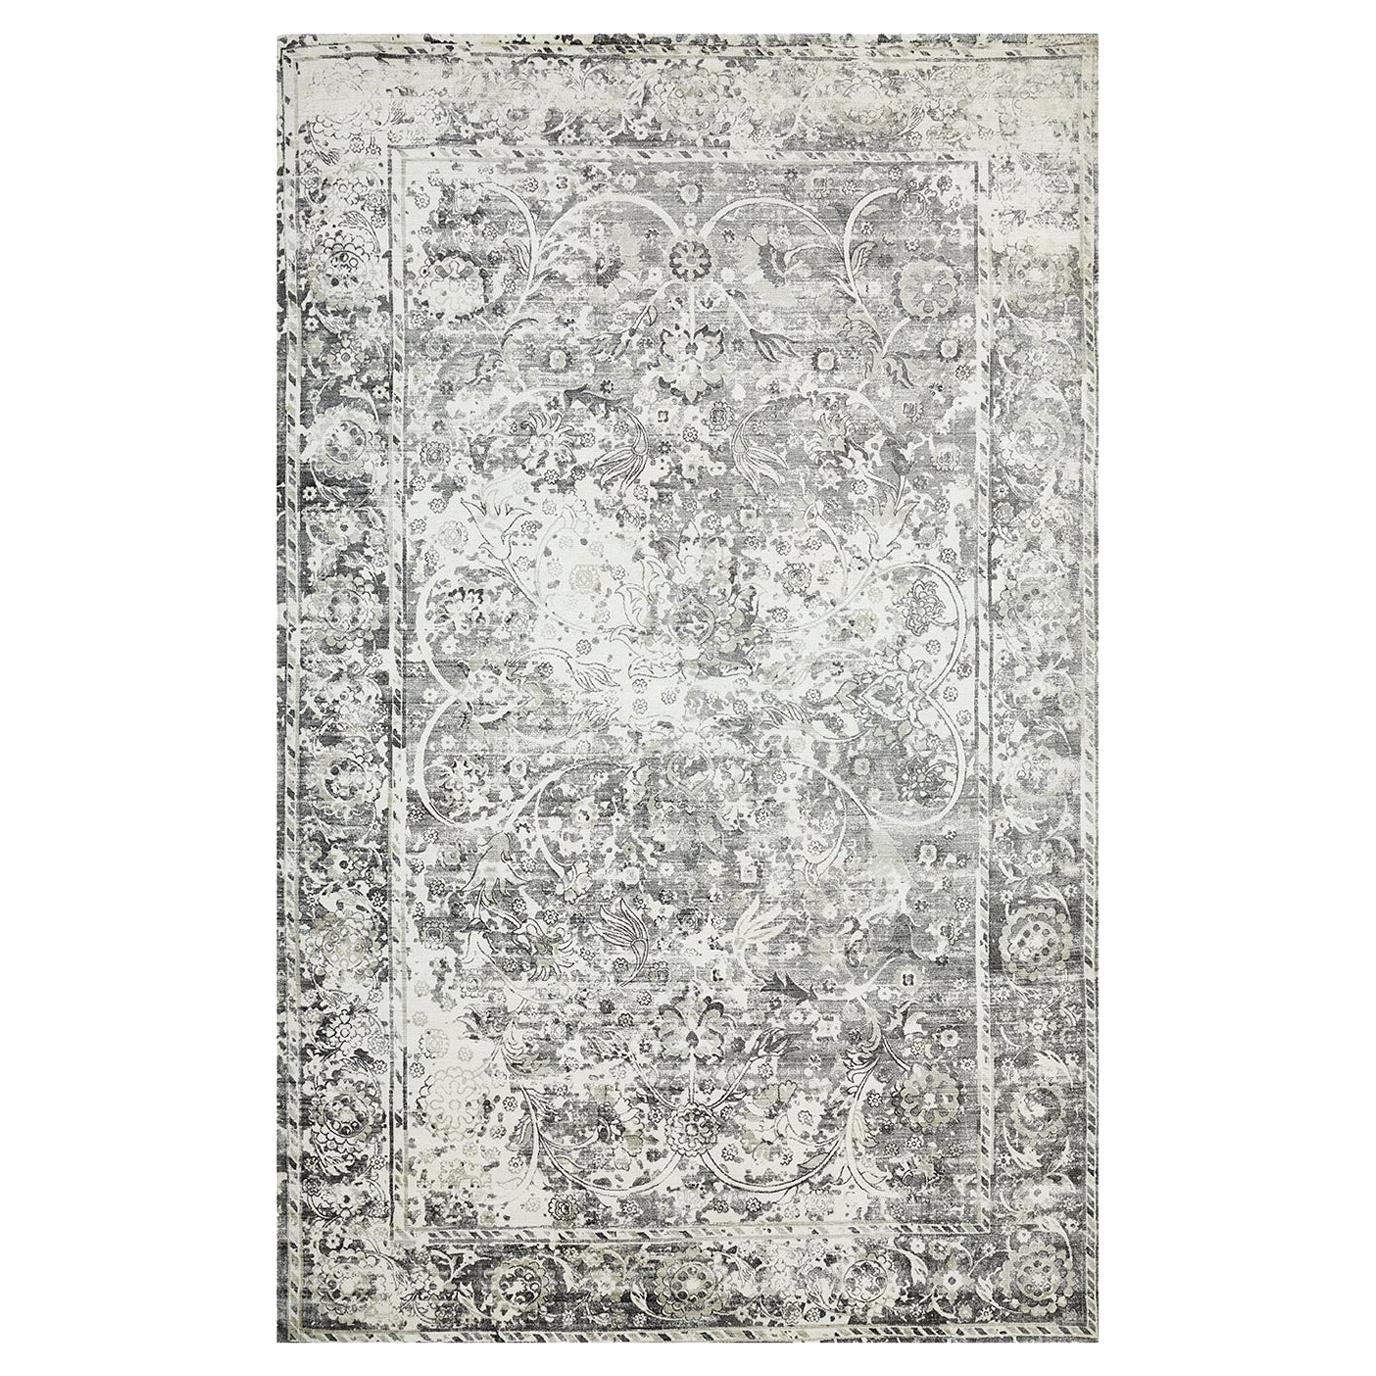 Indian Made Handmade Contemporary Transitional Area Rug For Sale